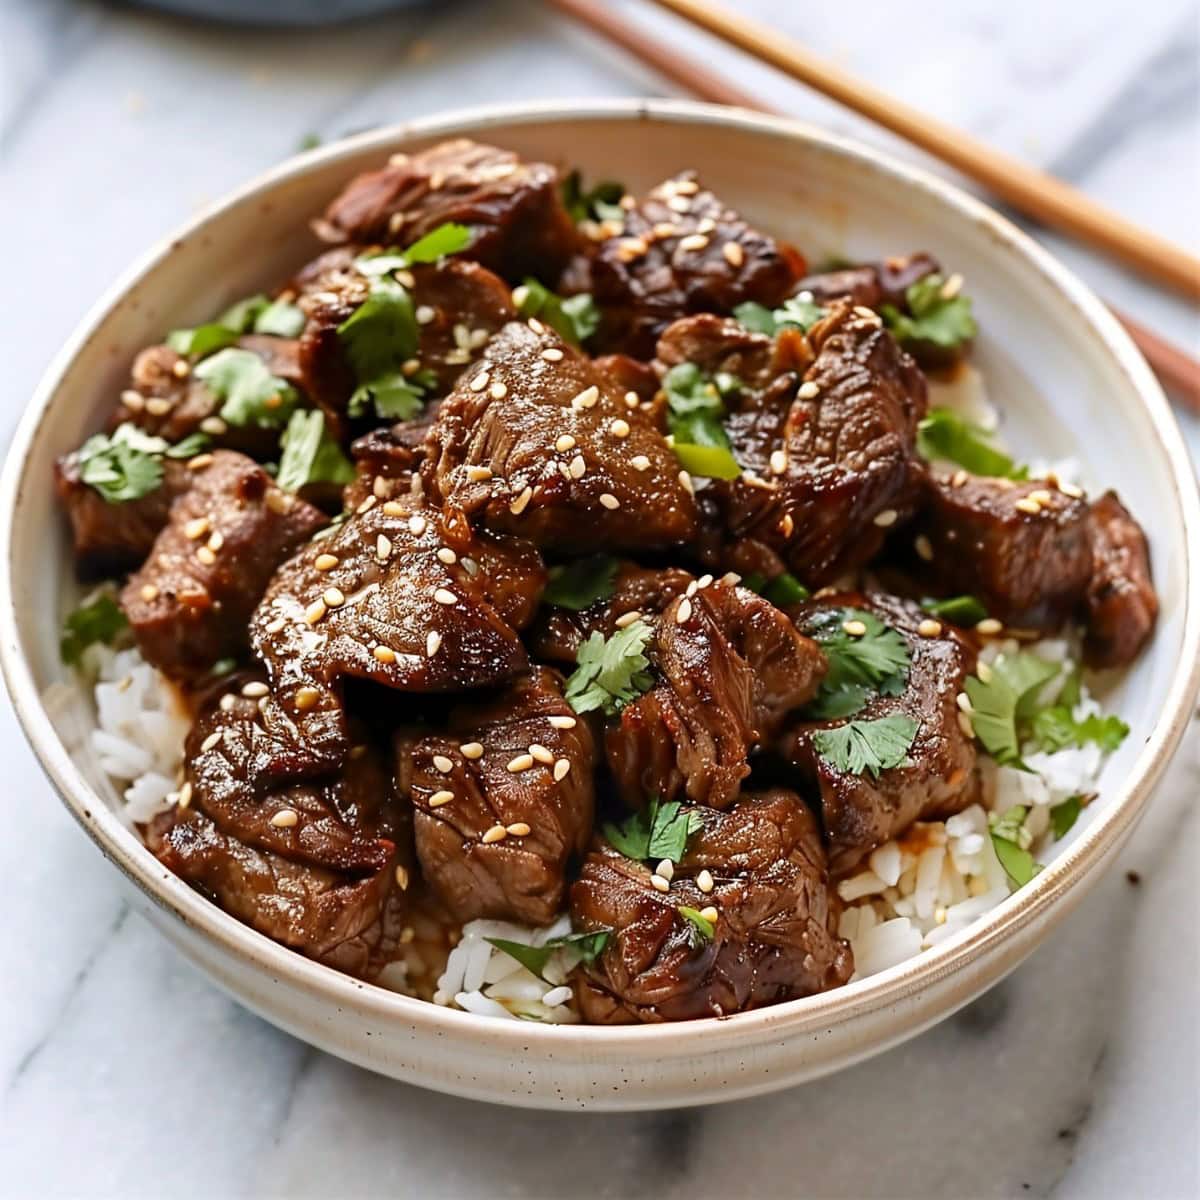 Tender chunks of Asian steak bites served with rice in a bowl